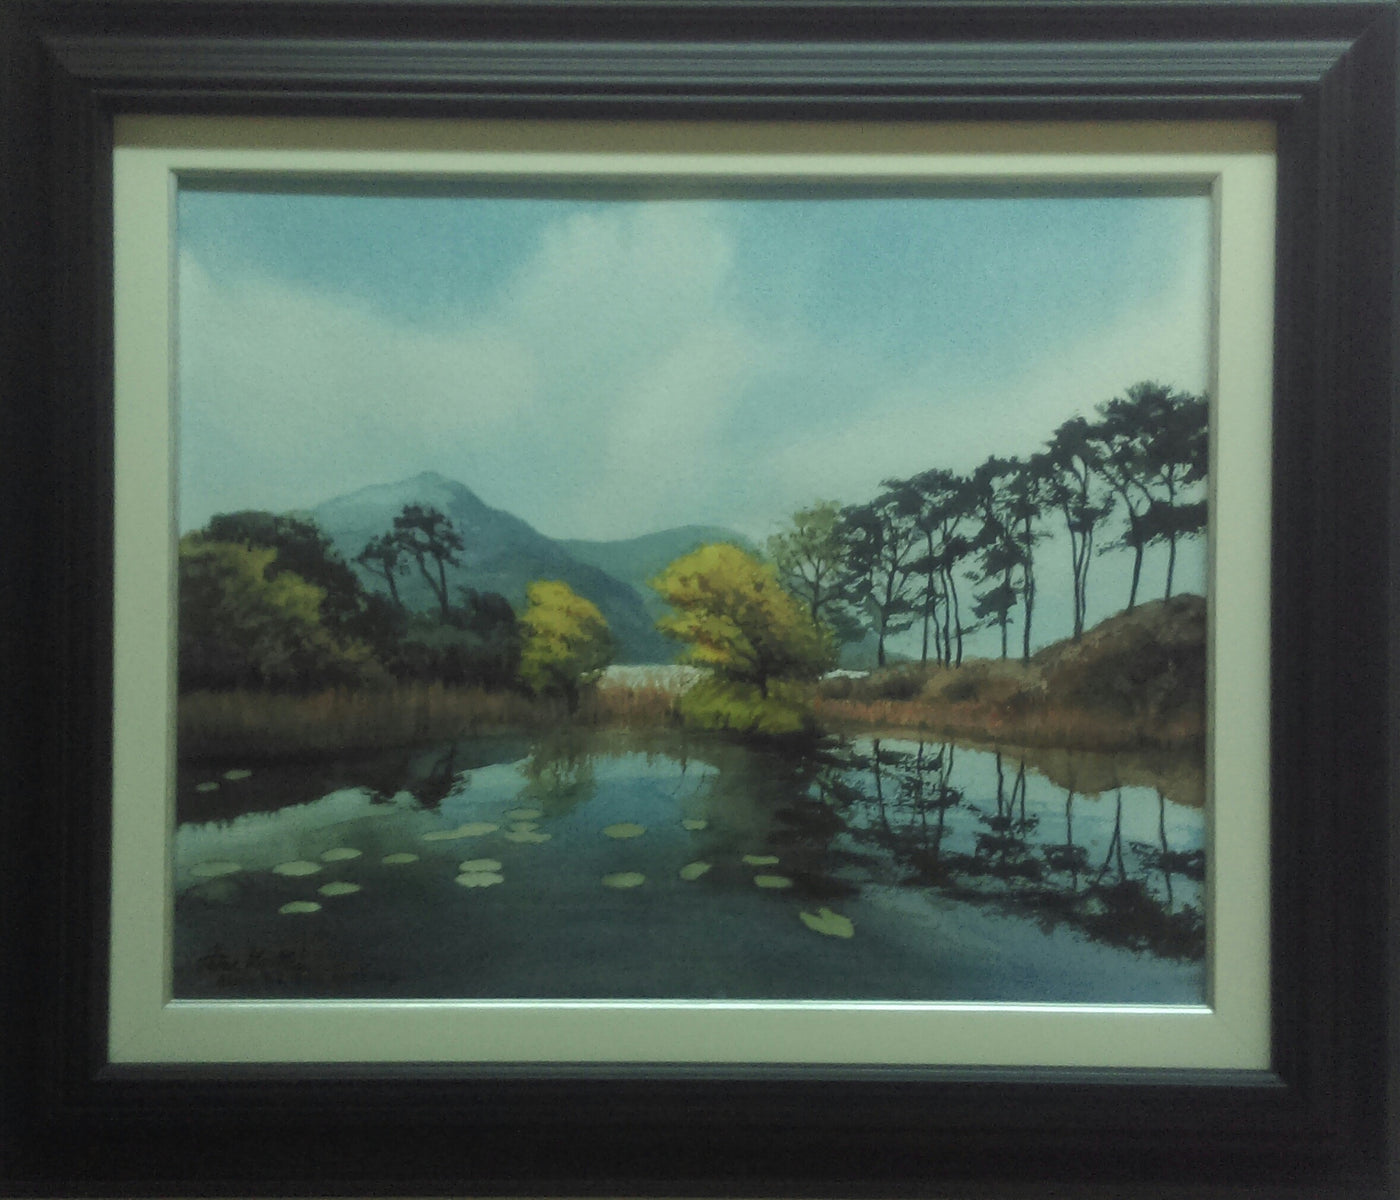 Along The Ring of Kerry by Peter Knuttel - Green Gallery